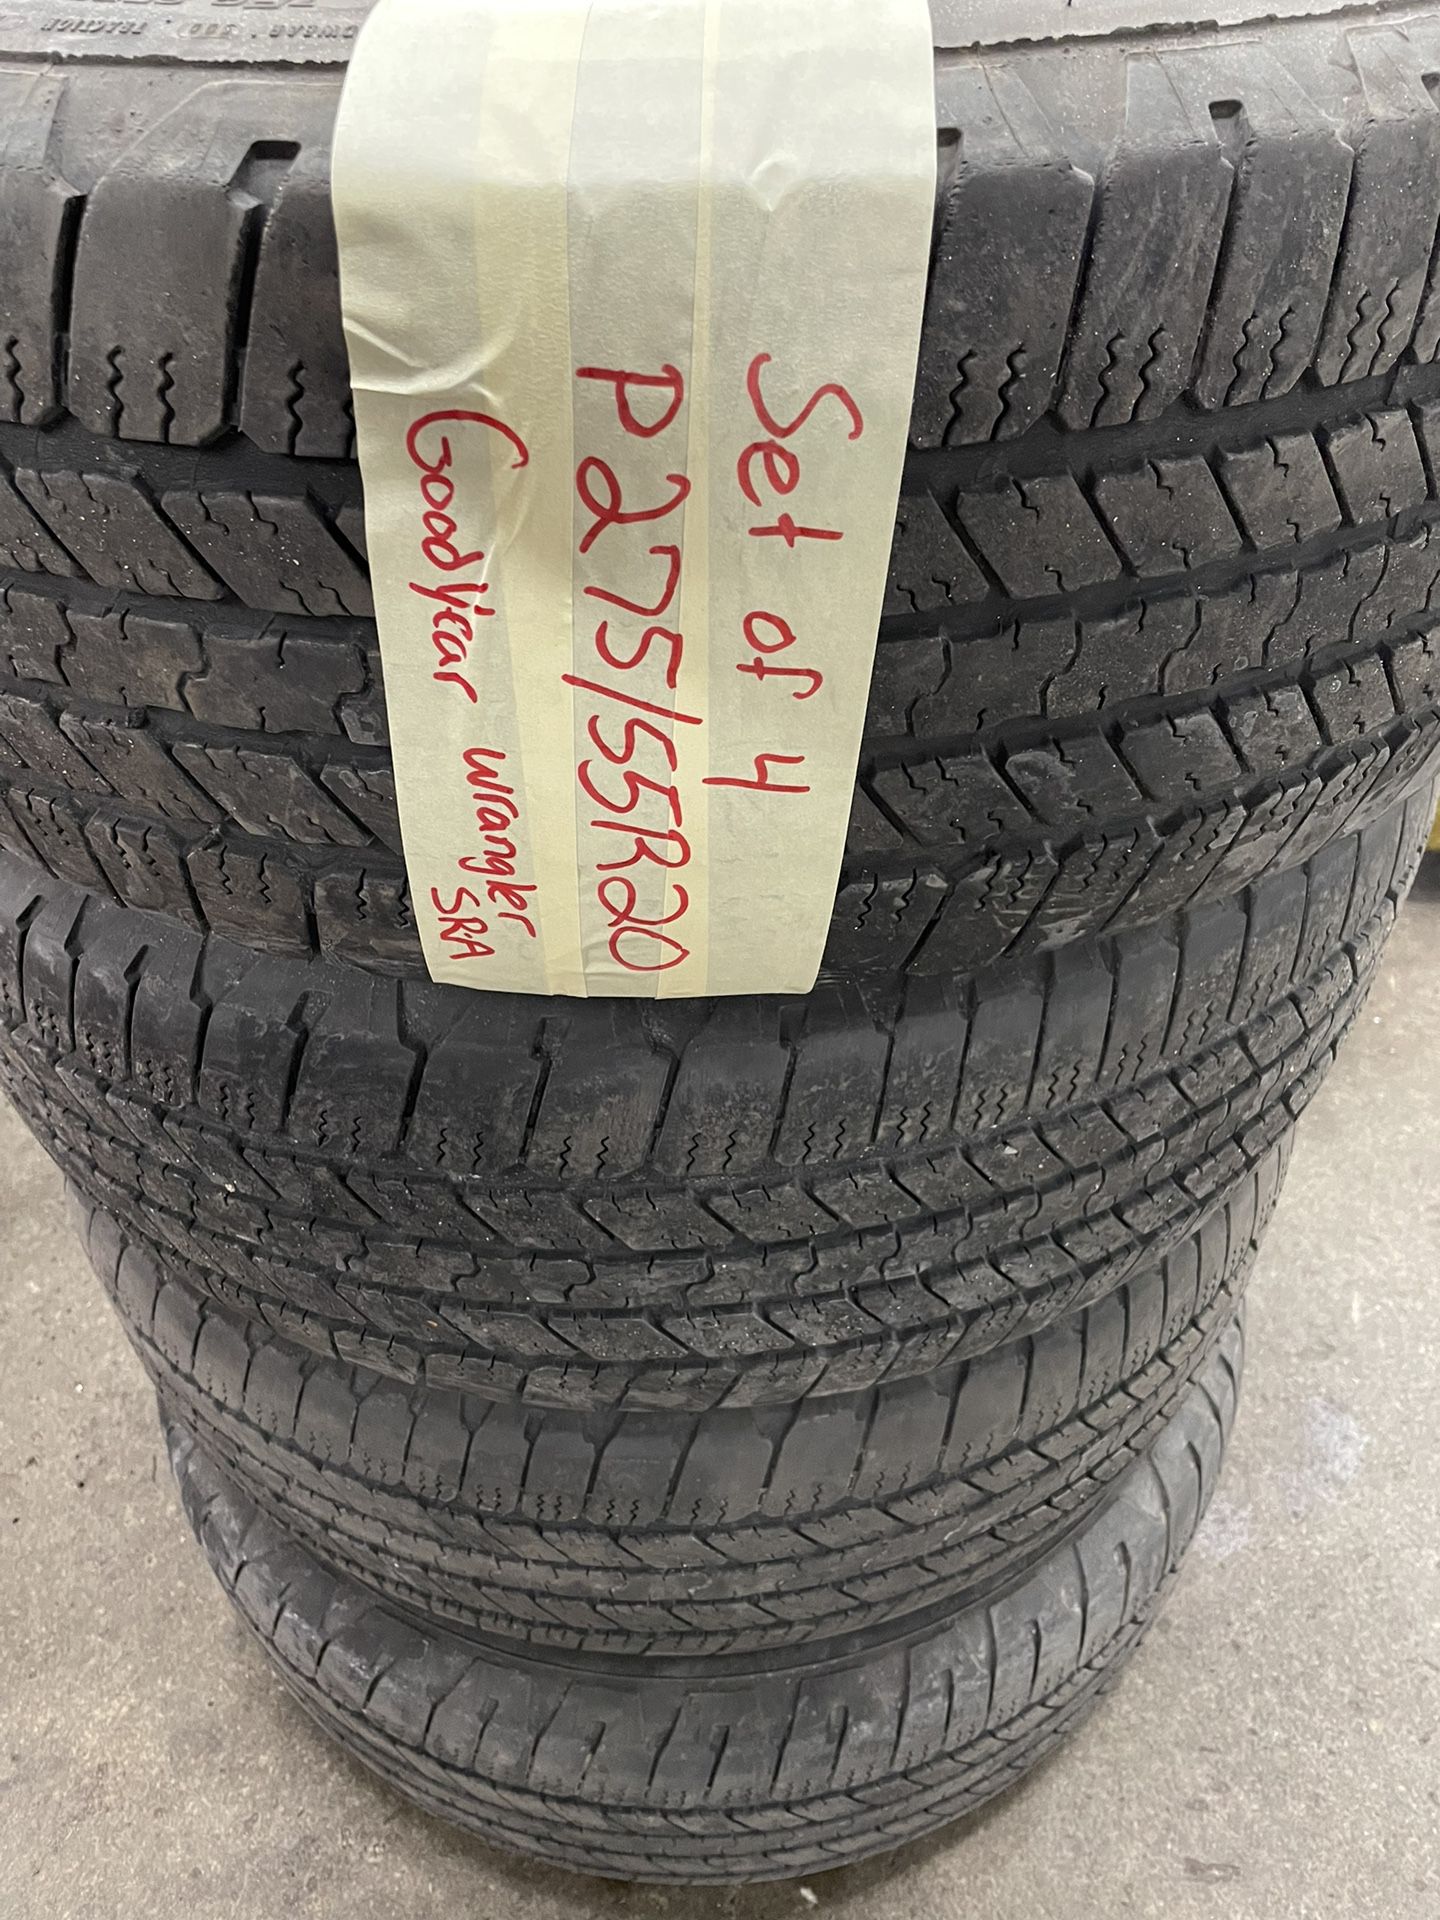 set of 4 tires p275/55r20 goodyear wrangler sr-a good condition $175 for  Sale in Naugatuck, CT - OfferUp